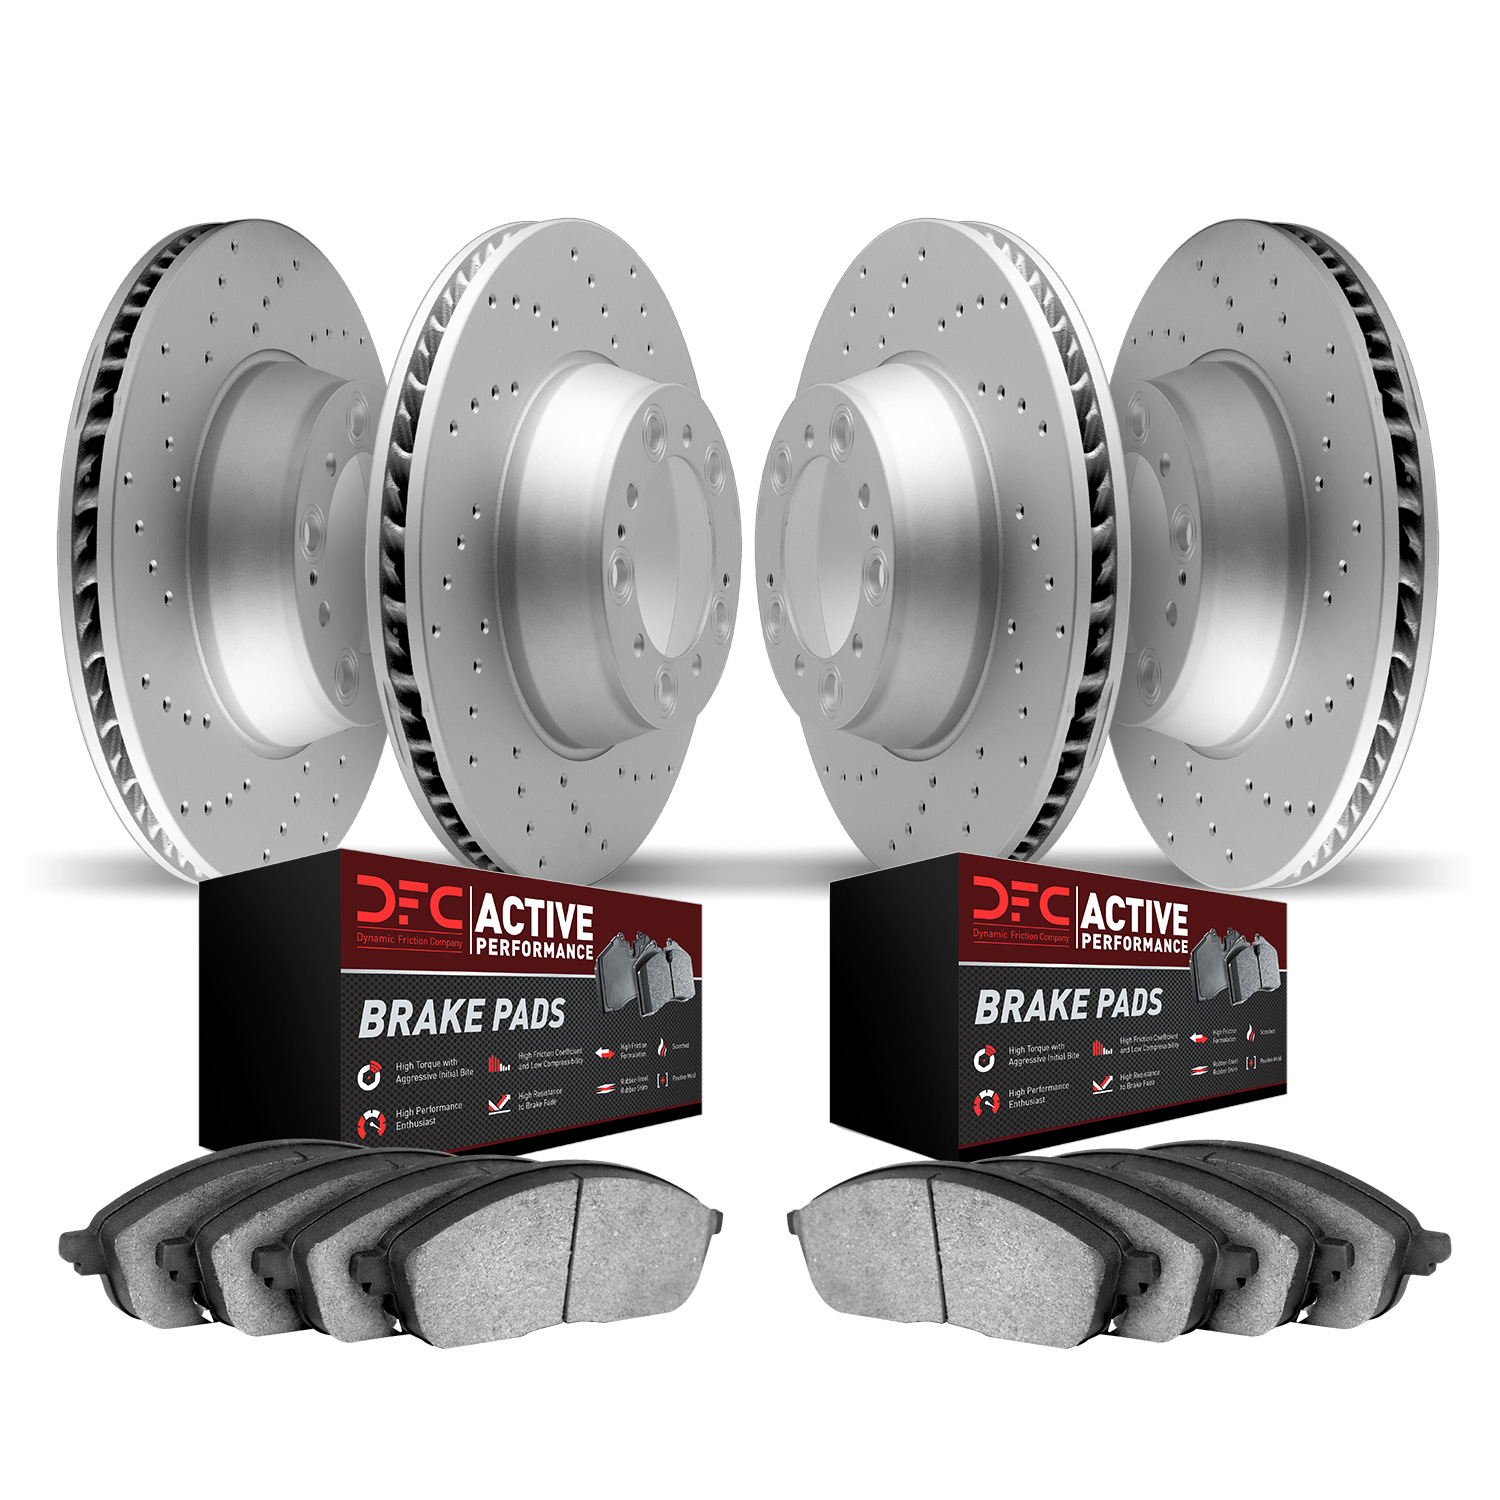 Geoperformance Drilled Brake Rotors with Active Performance Pads